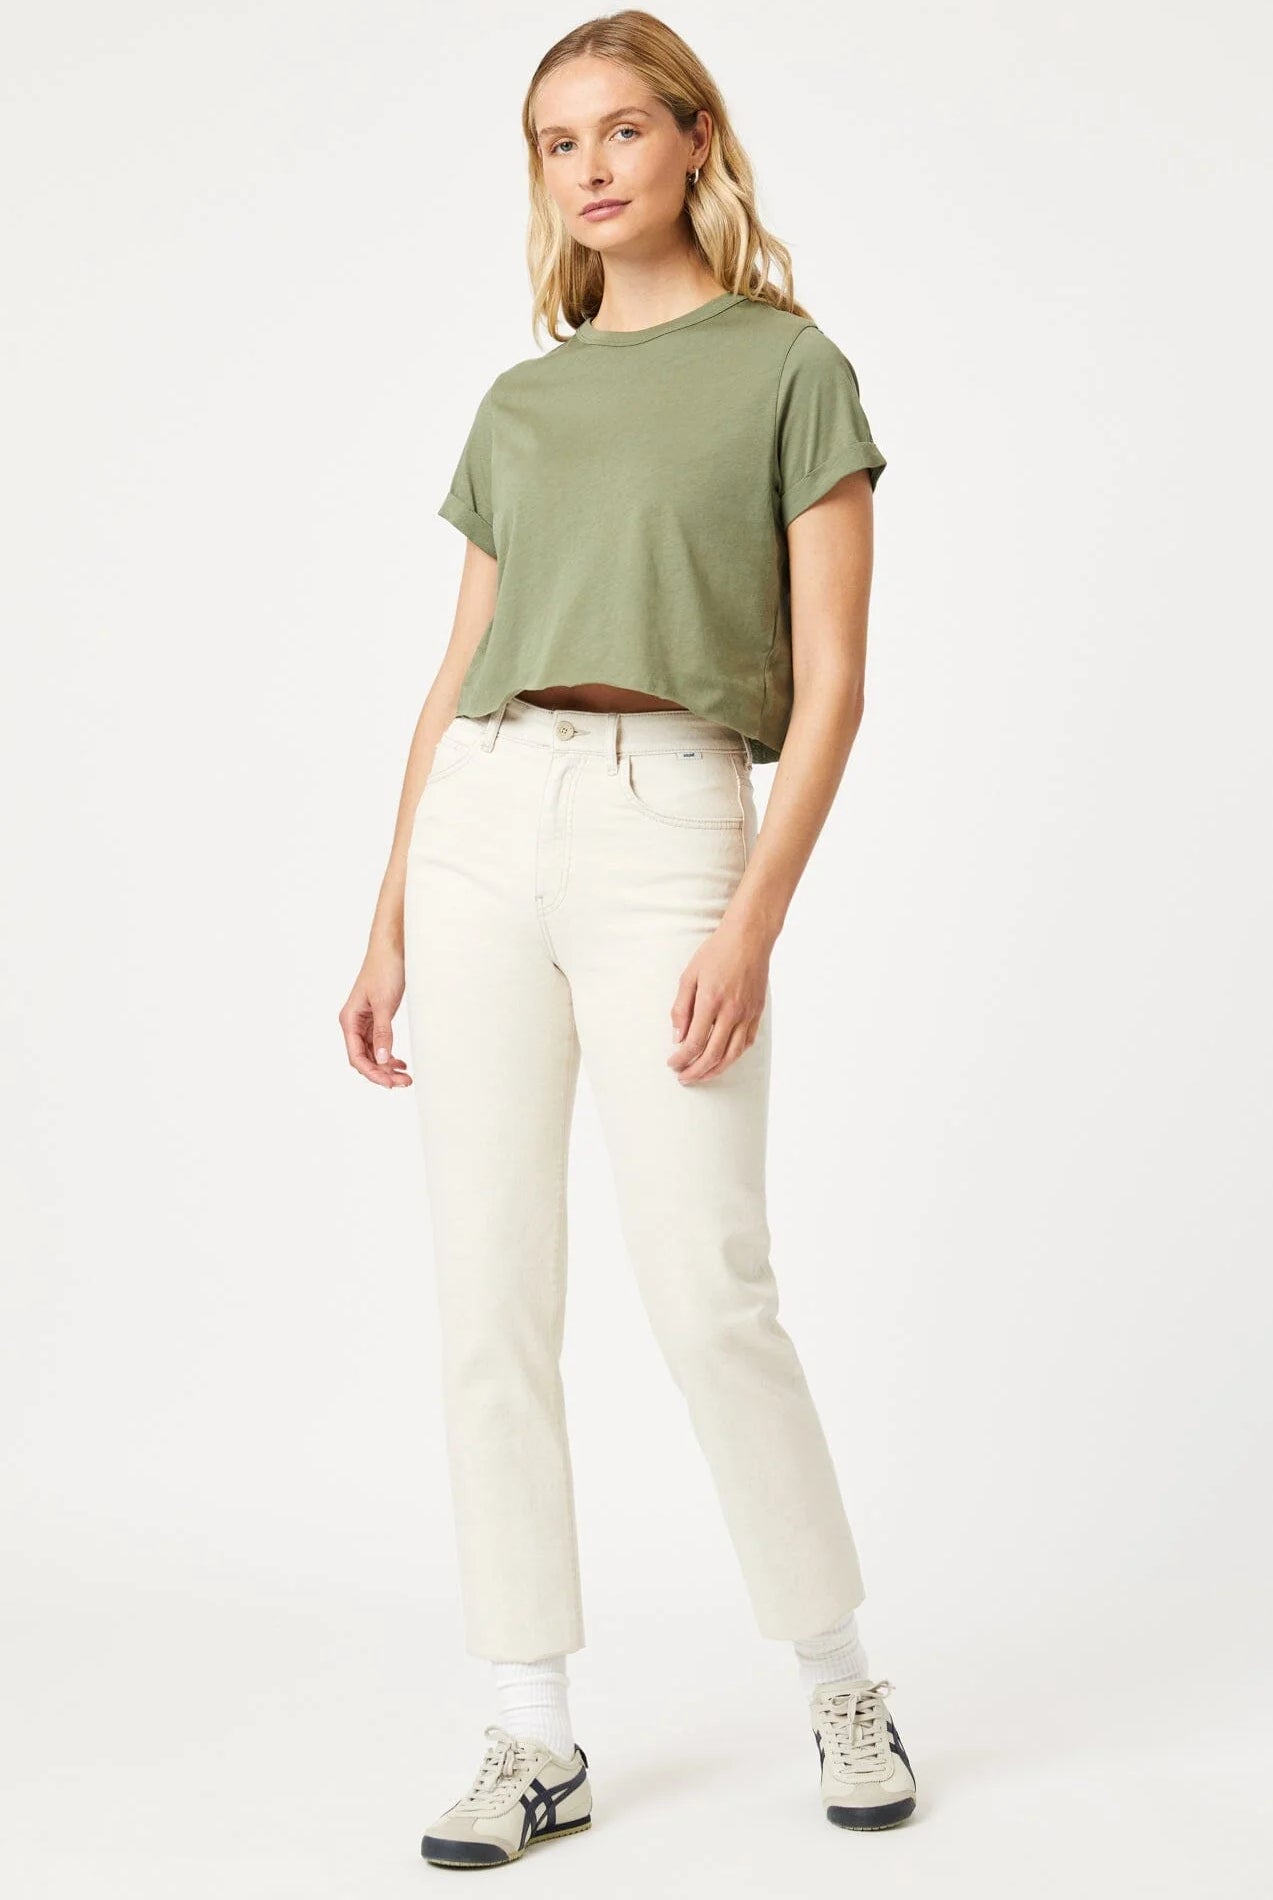 Cropped Green T-Shirt Apex Ethical Boutique